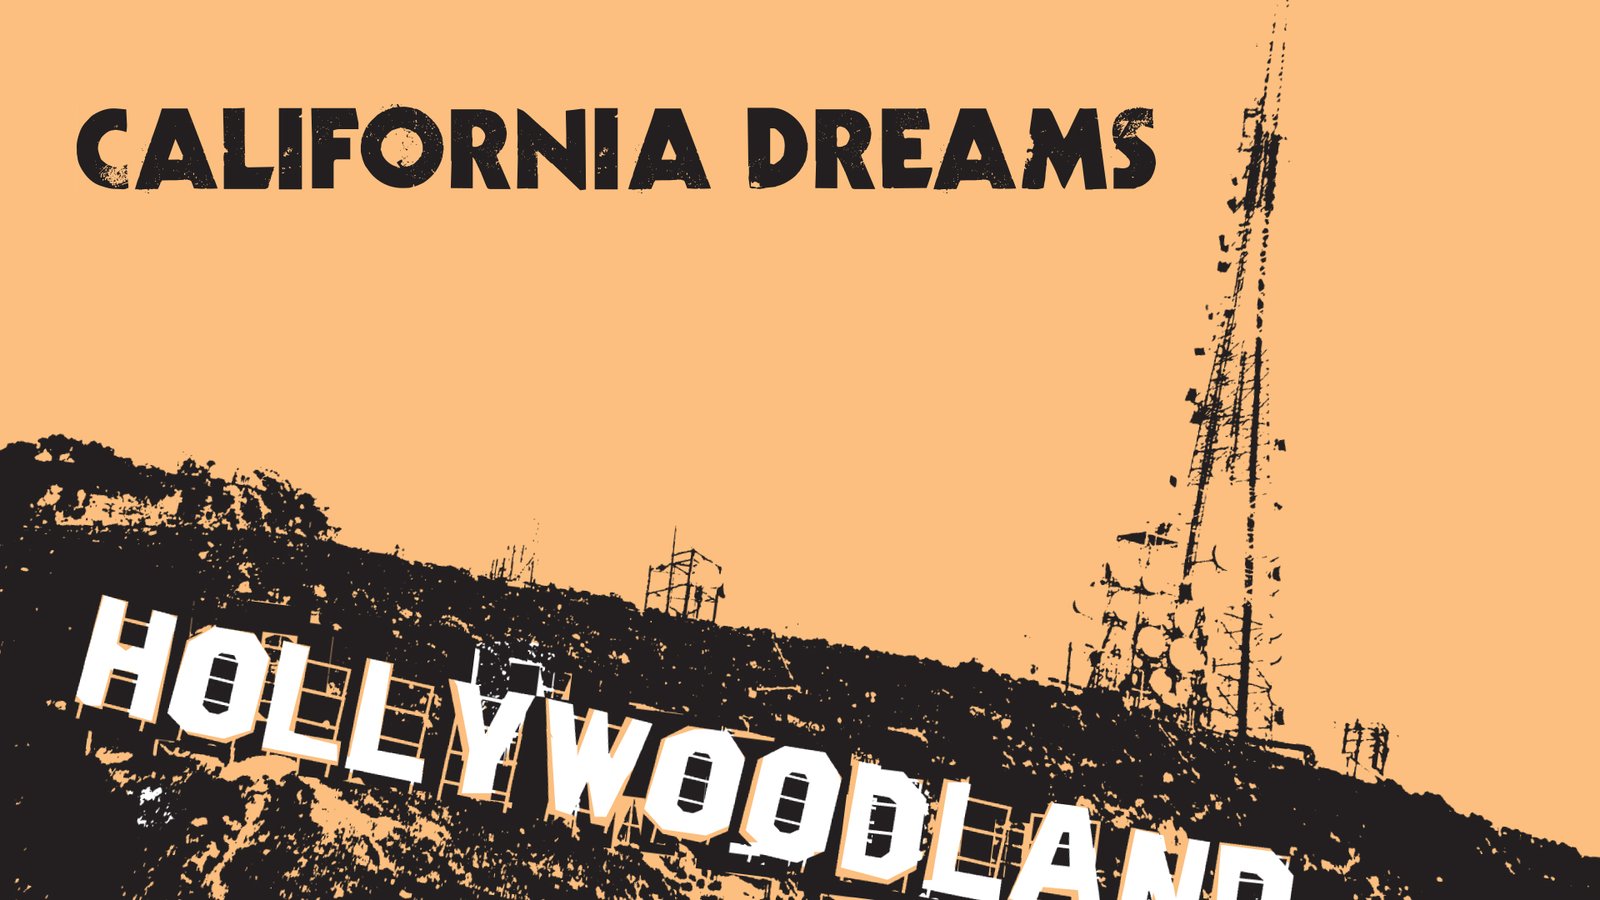 California Dreams - Trying to "Make-it" in Hollywood